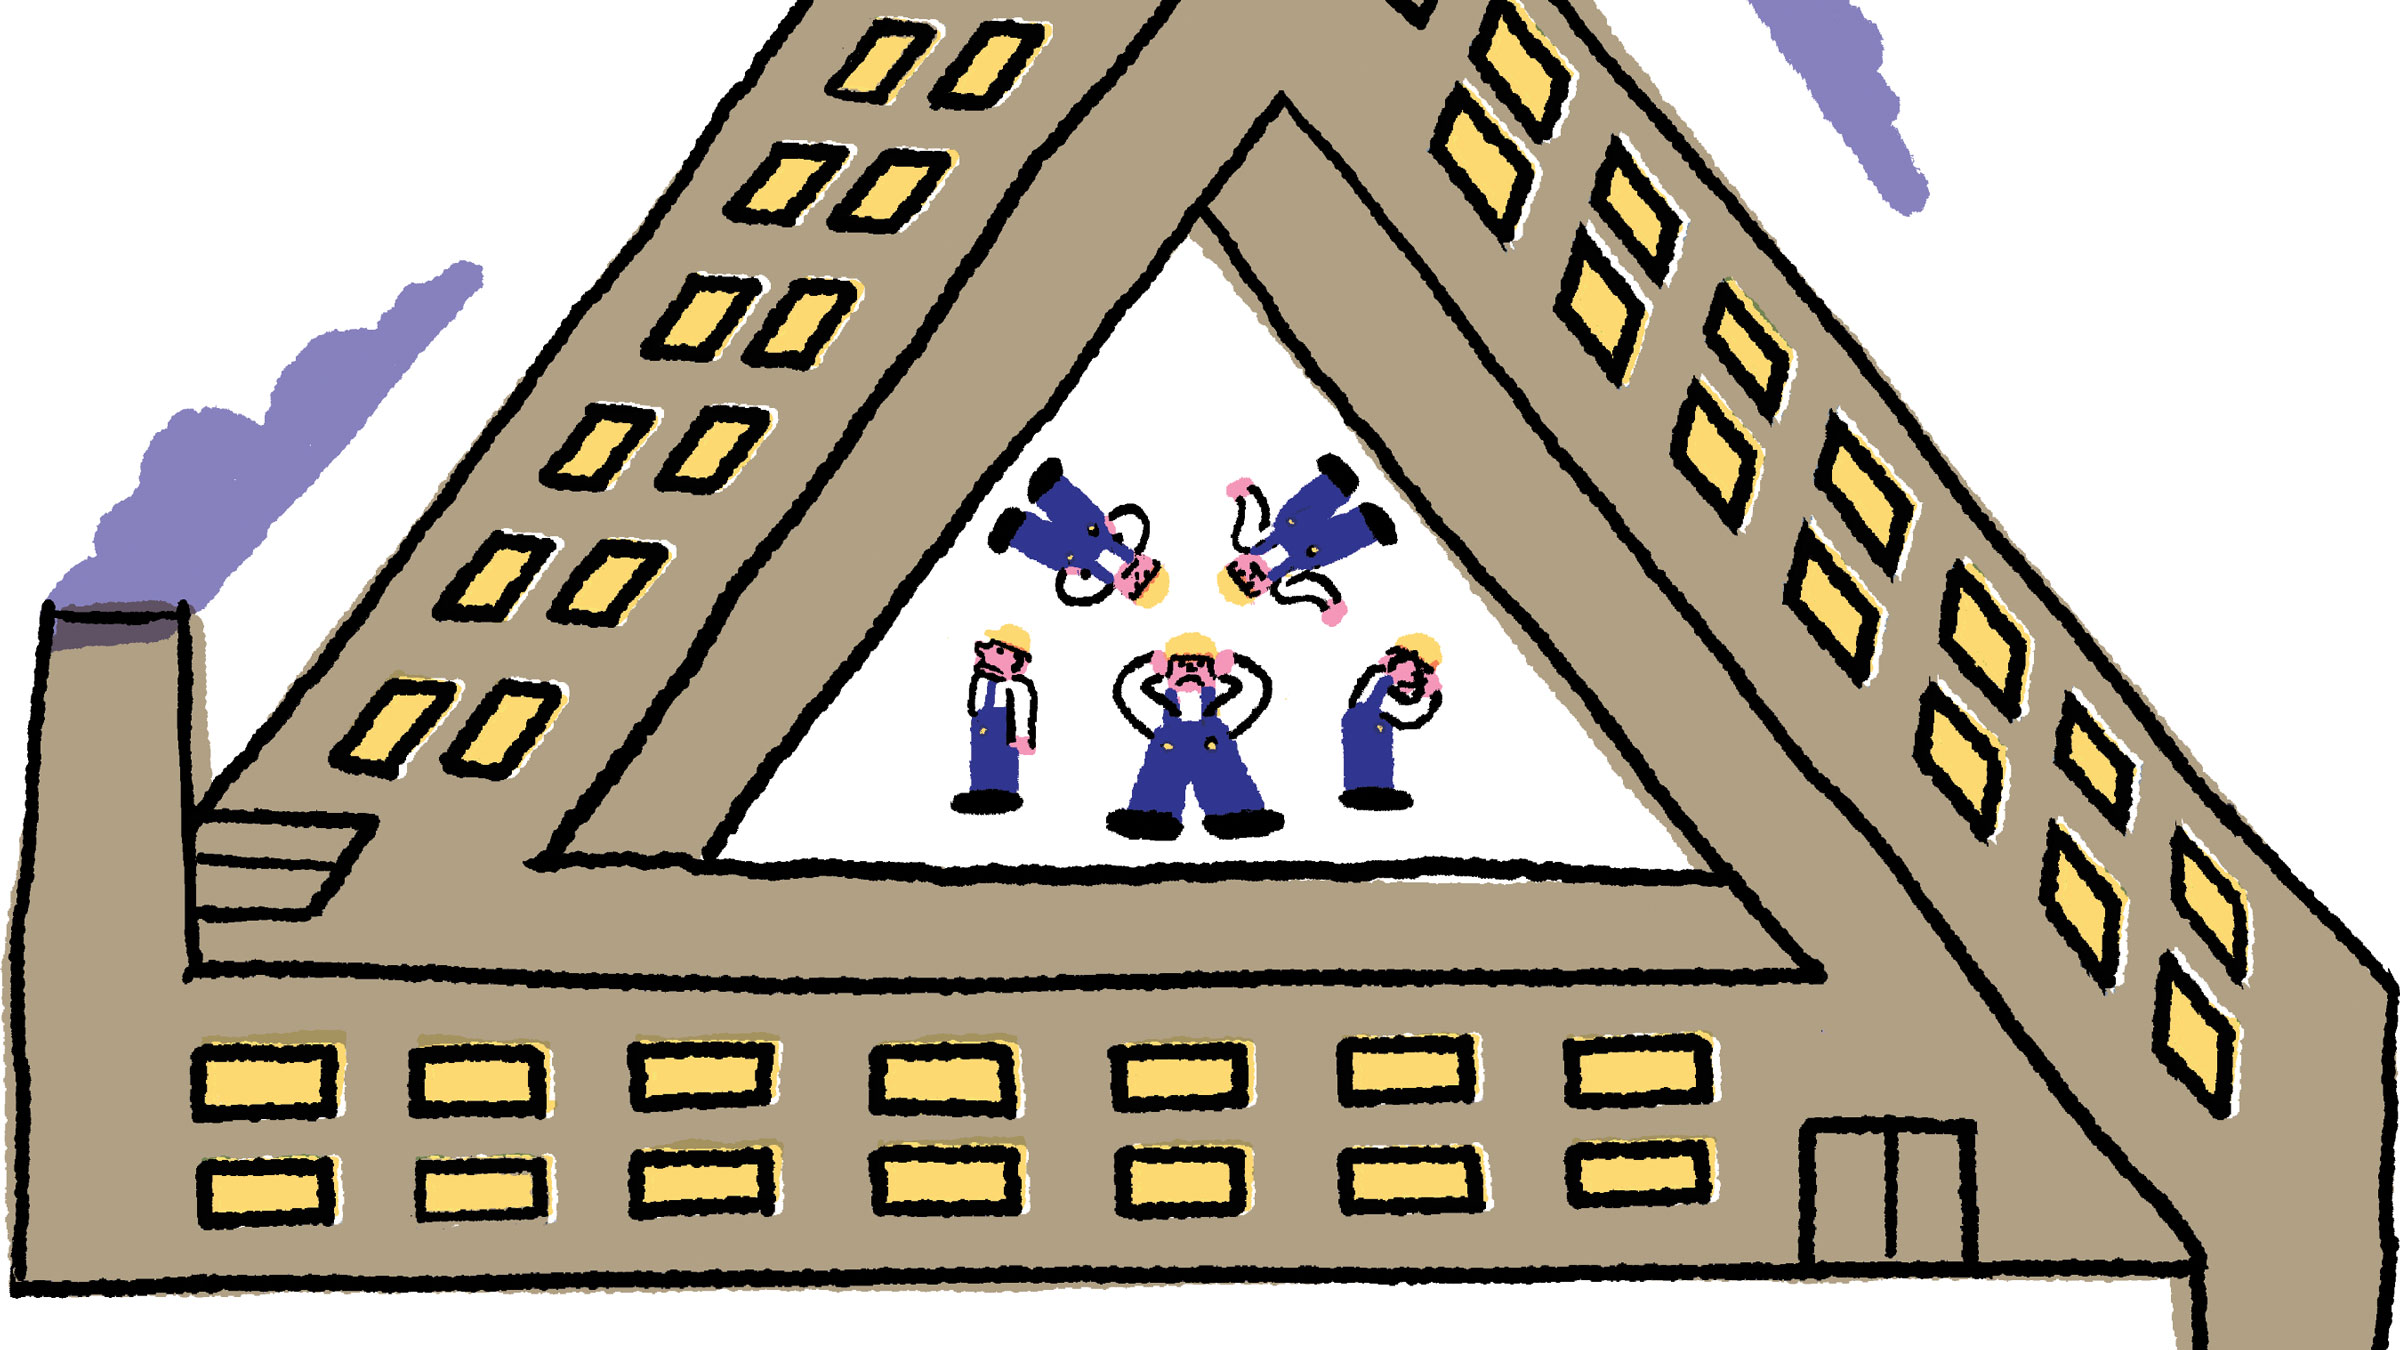 Illustration of workers trapped in the atrium of a building